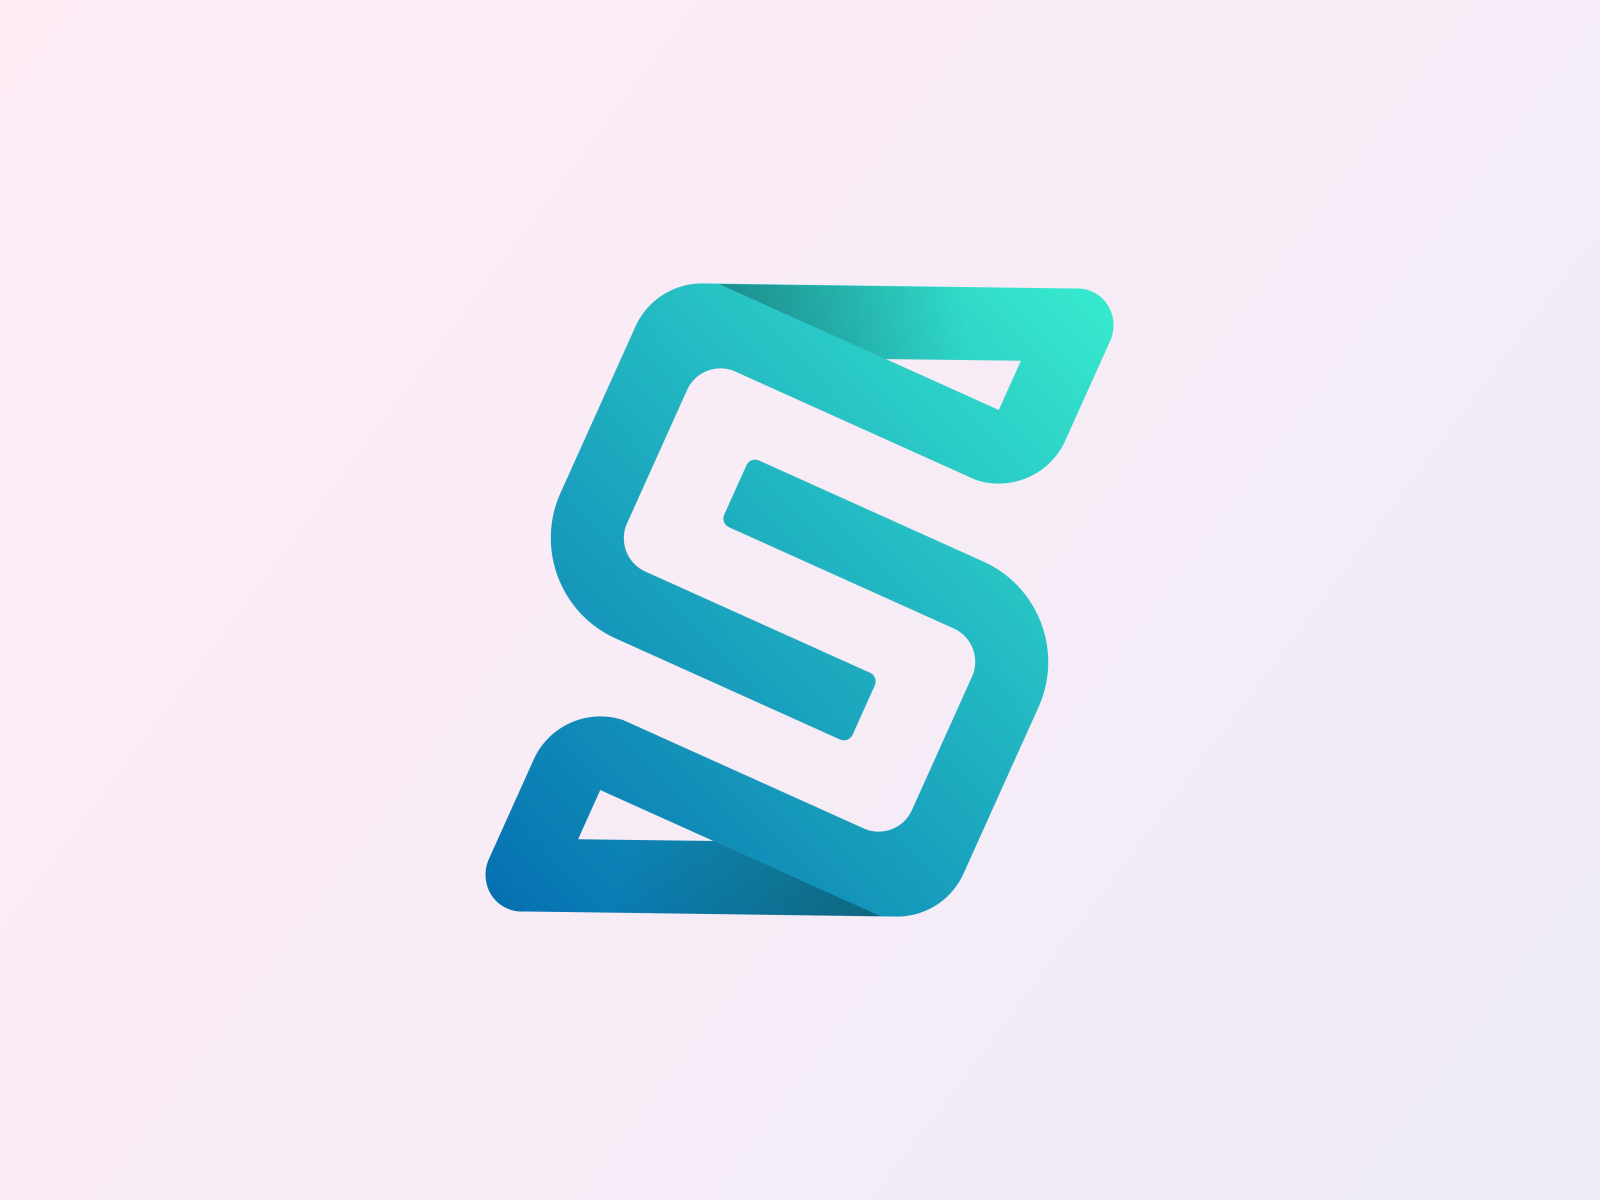 Letter S by Tahmid Ahmed on Dribbble